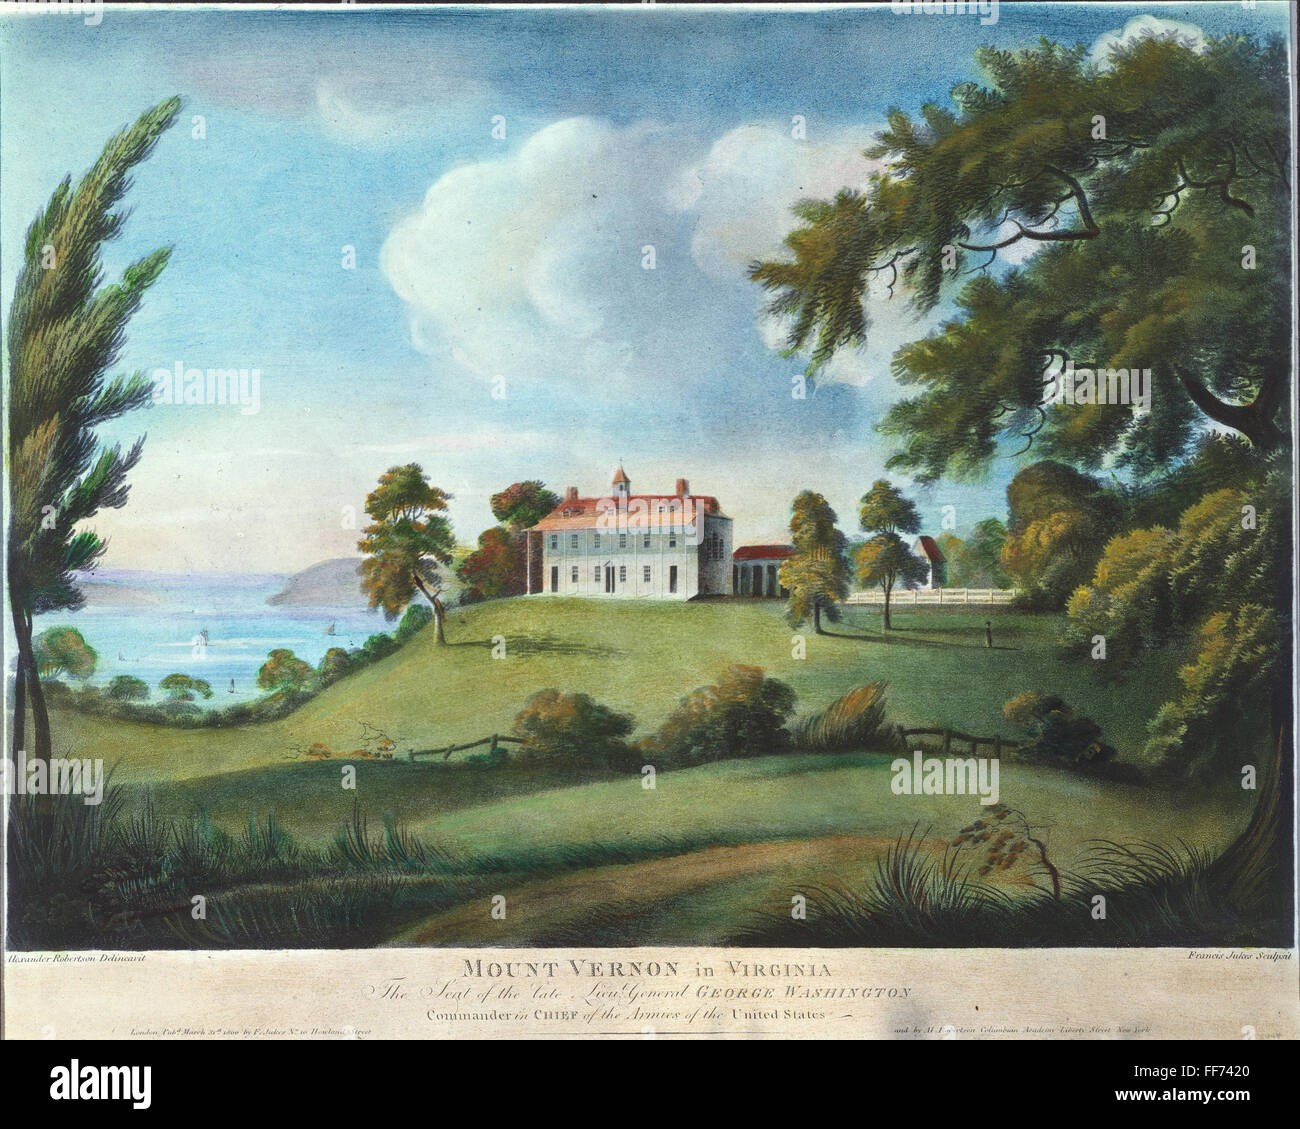 MOUNT VERNON, 1800. /nMount Vernon, the home of George Washington on the Potomac River in Virginia. Aquatint, 1800, by Francis Jukes after Alexander Robertson. Stock Photo